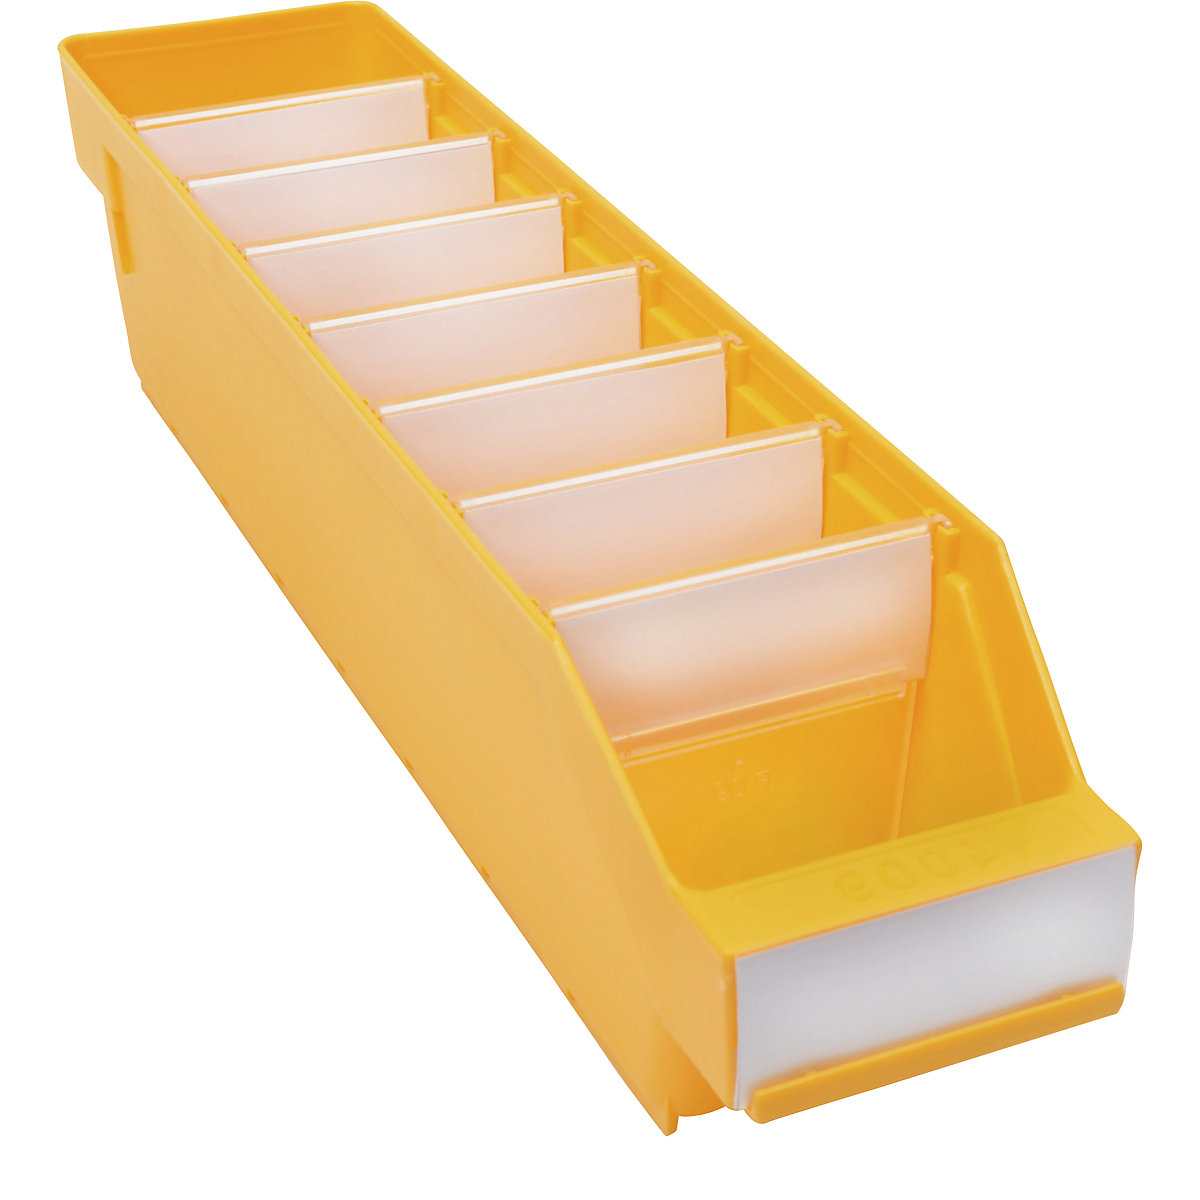 Shelf bin made of highly impact resistant polypropylene – STEMO, yellow, LxWxH 400 x 90 x 95 mm, pack of 40-5